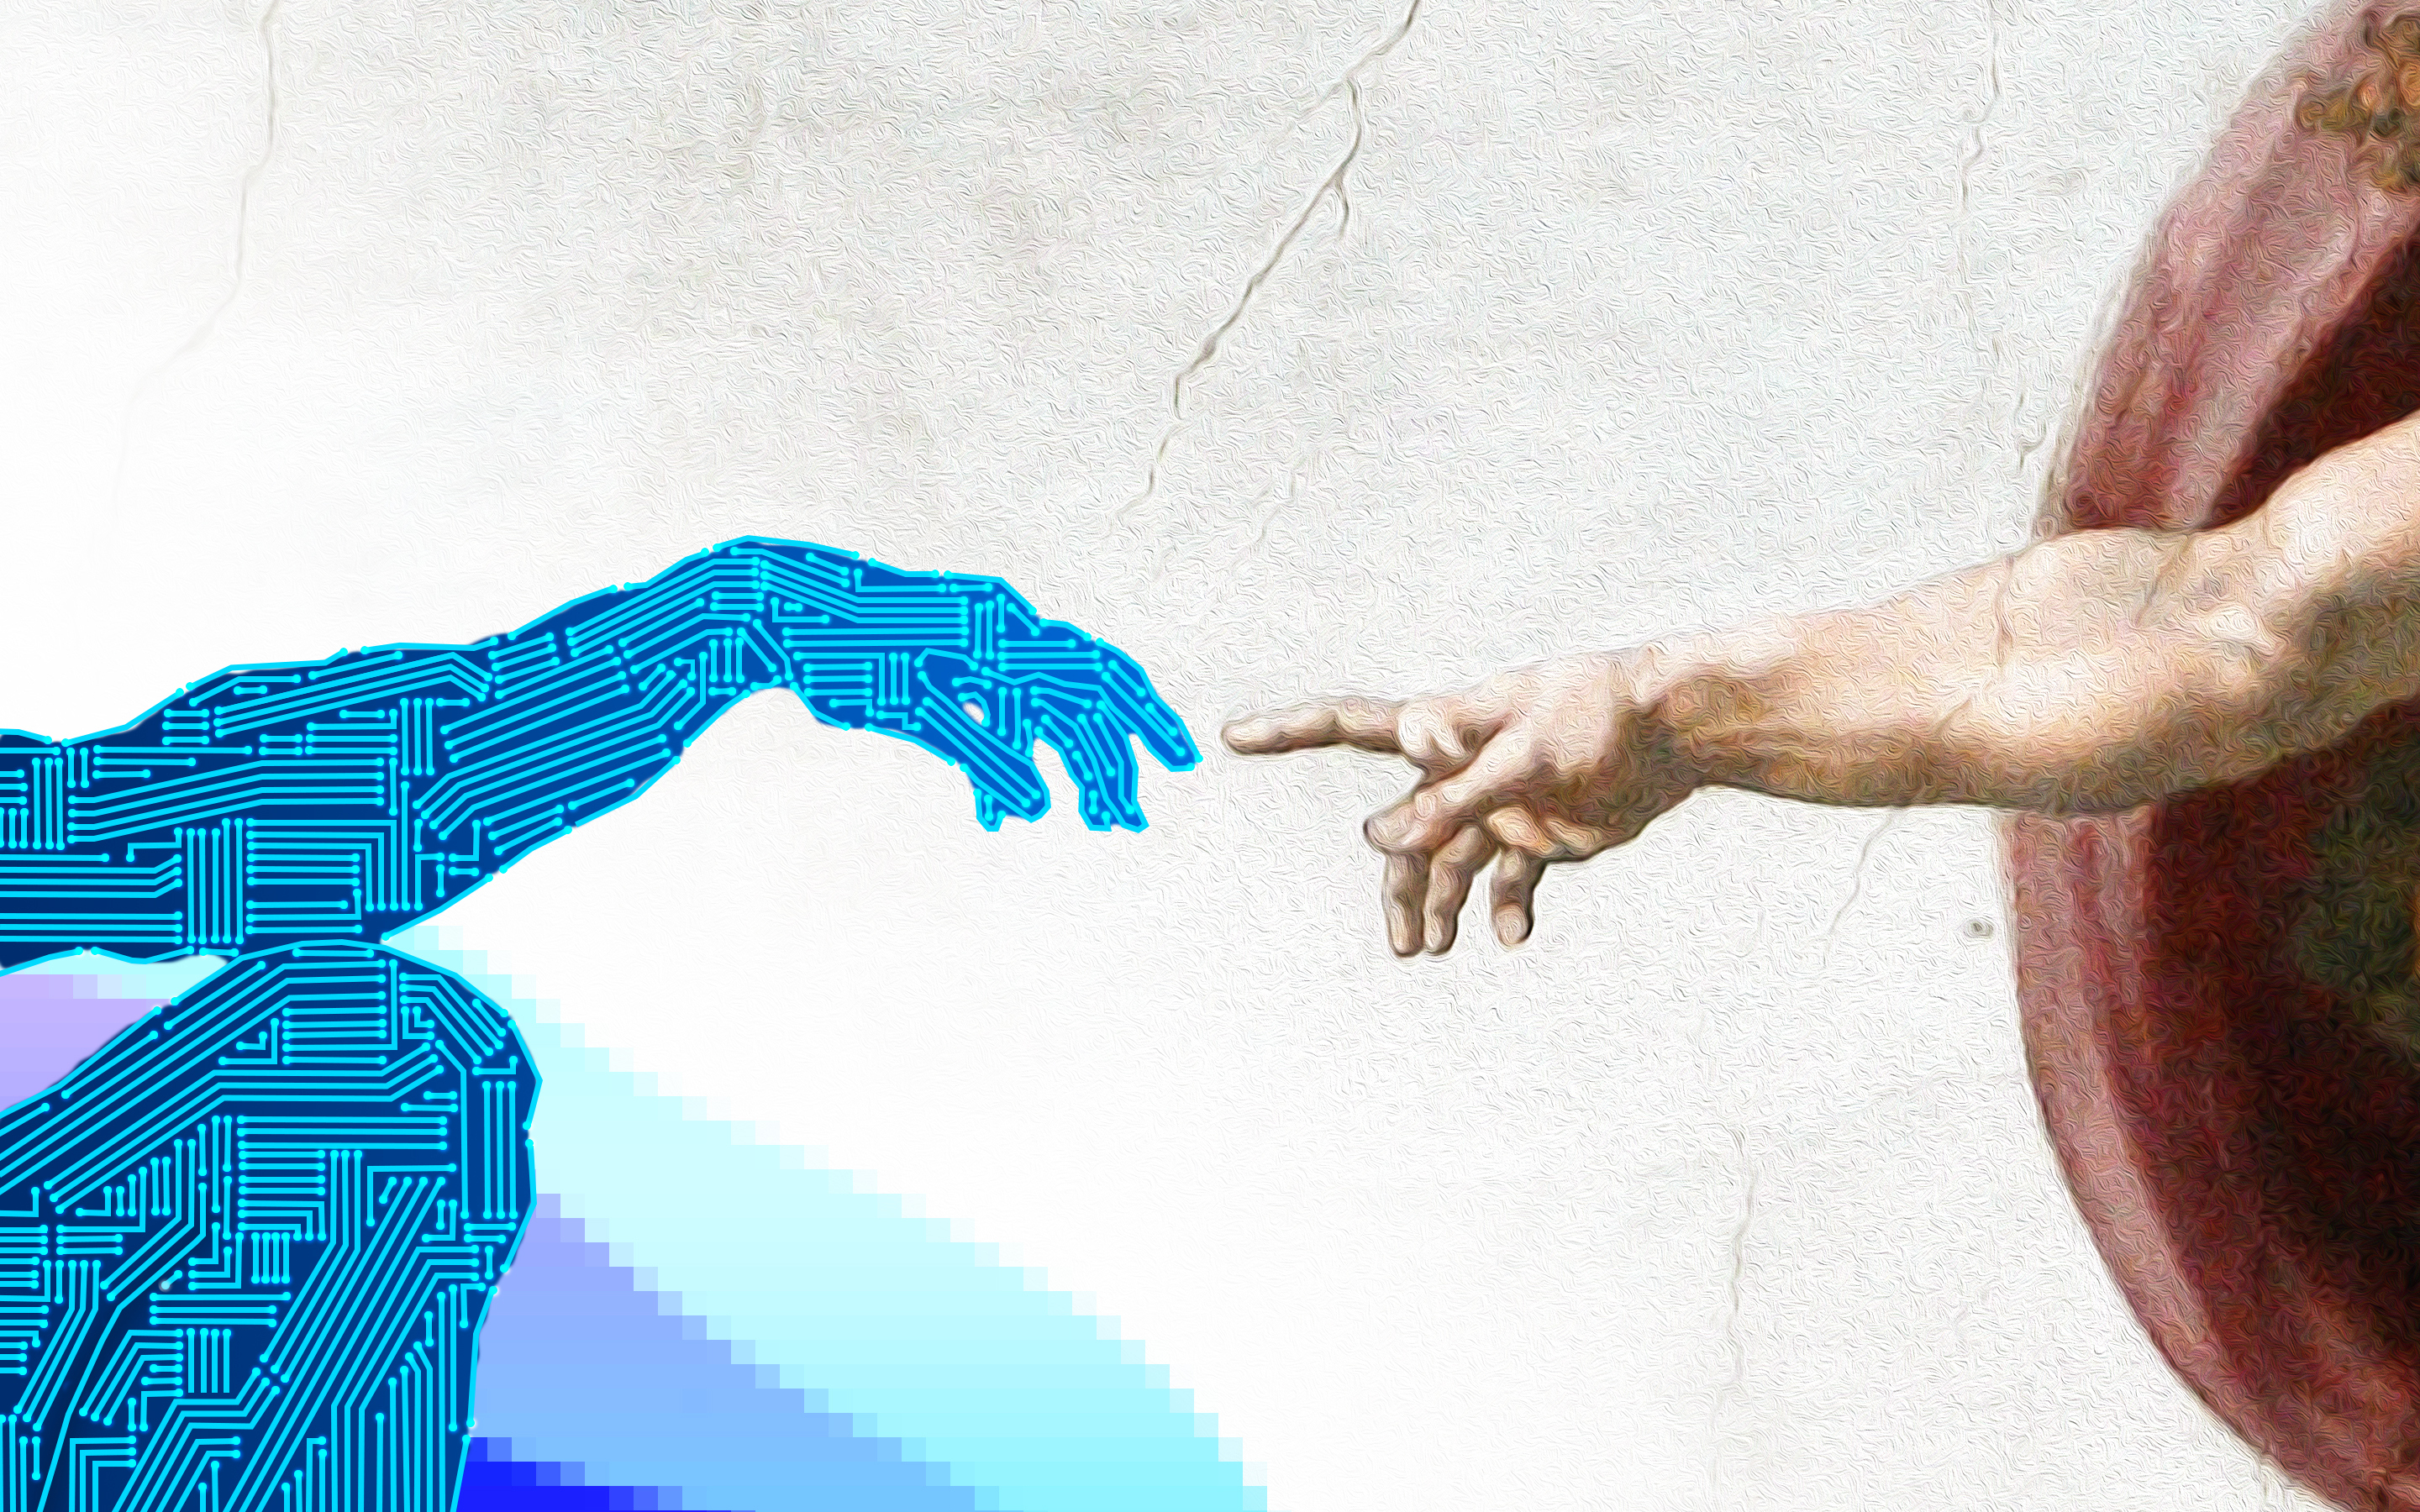 A version of Michelangelo’s painting “The Creation of Adam” with one body in digital blue, depicting the development of artificial intelligence and machine learning.